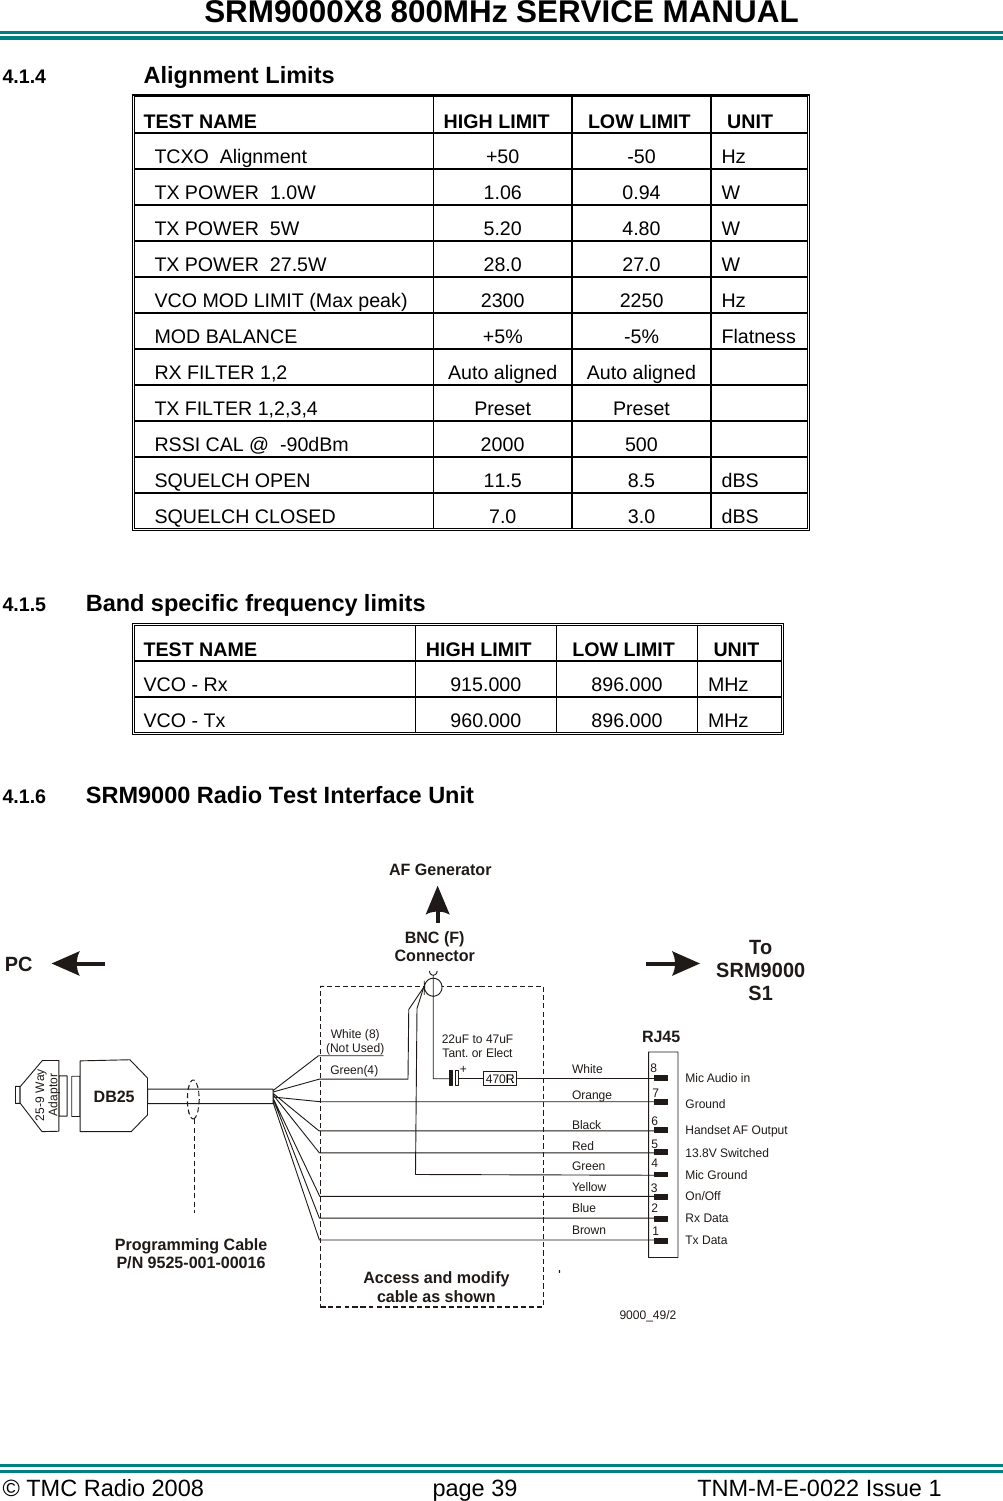 SRM9000X8 800MHz SERVICE MANUAL © TMC Radio 2008  page 39   TNM-M-E-0022 Issue 1  4.1.4    Alignment Limits  TEST NAME  HIGH LIMIT   LOW LIMIT   UNIT   TCXO  Alignment  +50  -50  Hz   TX POWER  1.0W    1.06  0.94  W   TX POWER  5W    5.20  4.80  W   TX POWER  27.5W    28.0  27.0  W   VCO MOD LIMIT (Max peak)  2300  2250  Hz   MOD BALANCE  +5%  -5%  Flatness   RX FILTER 1,2   Auto aligned  Auto aligned     TX FILTER 1,2,3,4  Preset  Preset     RSSI CAL @  -90dBm  2000  500     SQUELCH OPEN  11.5  8.5  dBS   SQUELCH CLOSED  7.0  3.0  dBS  4.1.5  Band specific frequency limits TEST NAME  HIGH LIMIT  LOW LIMIT  UNIT VCO - Rx  915.000  896.000  MHz VCO - Tx  960.000  896.000  MHz  4.1.6  SRM9000 Radio Test Interface Unit  BlackRedYellowBlueBrownOrangeGreen(4)White (8)(Not Used)+470E WhiteGreenMic Audio inMic GroundGroundHandset AF Output13.8V SwitchedOn/OffRx DataTx Data84765321RJ45PRM80Programming CableP/N 9525-001-00016BNC (F)Connector22uF to 47uFTant. or ElectDB25Access and modify cable as shown9000_49/225-9 WayAdaptorPC ToSRM9000S1AF GeneratorR    